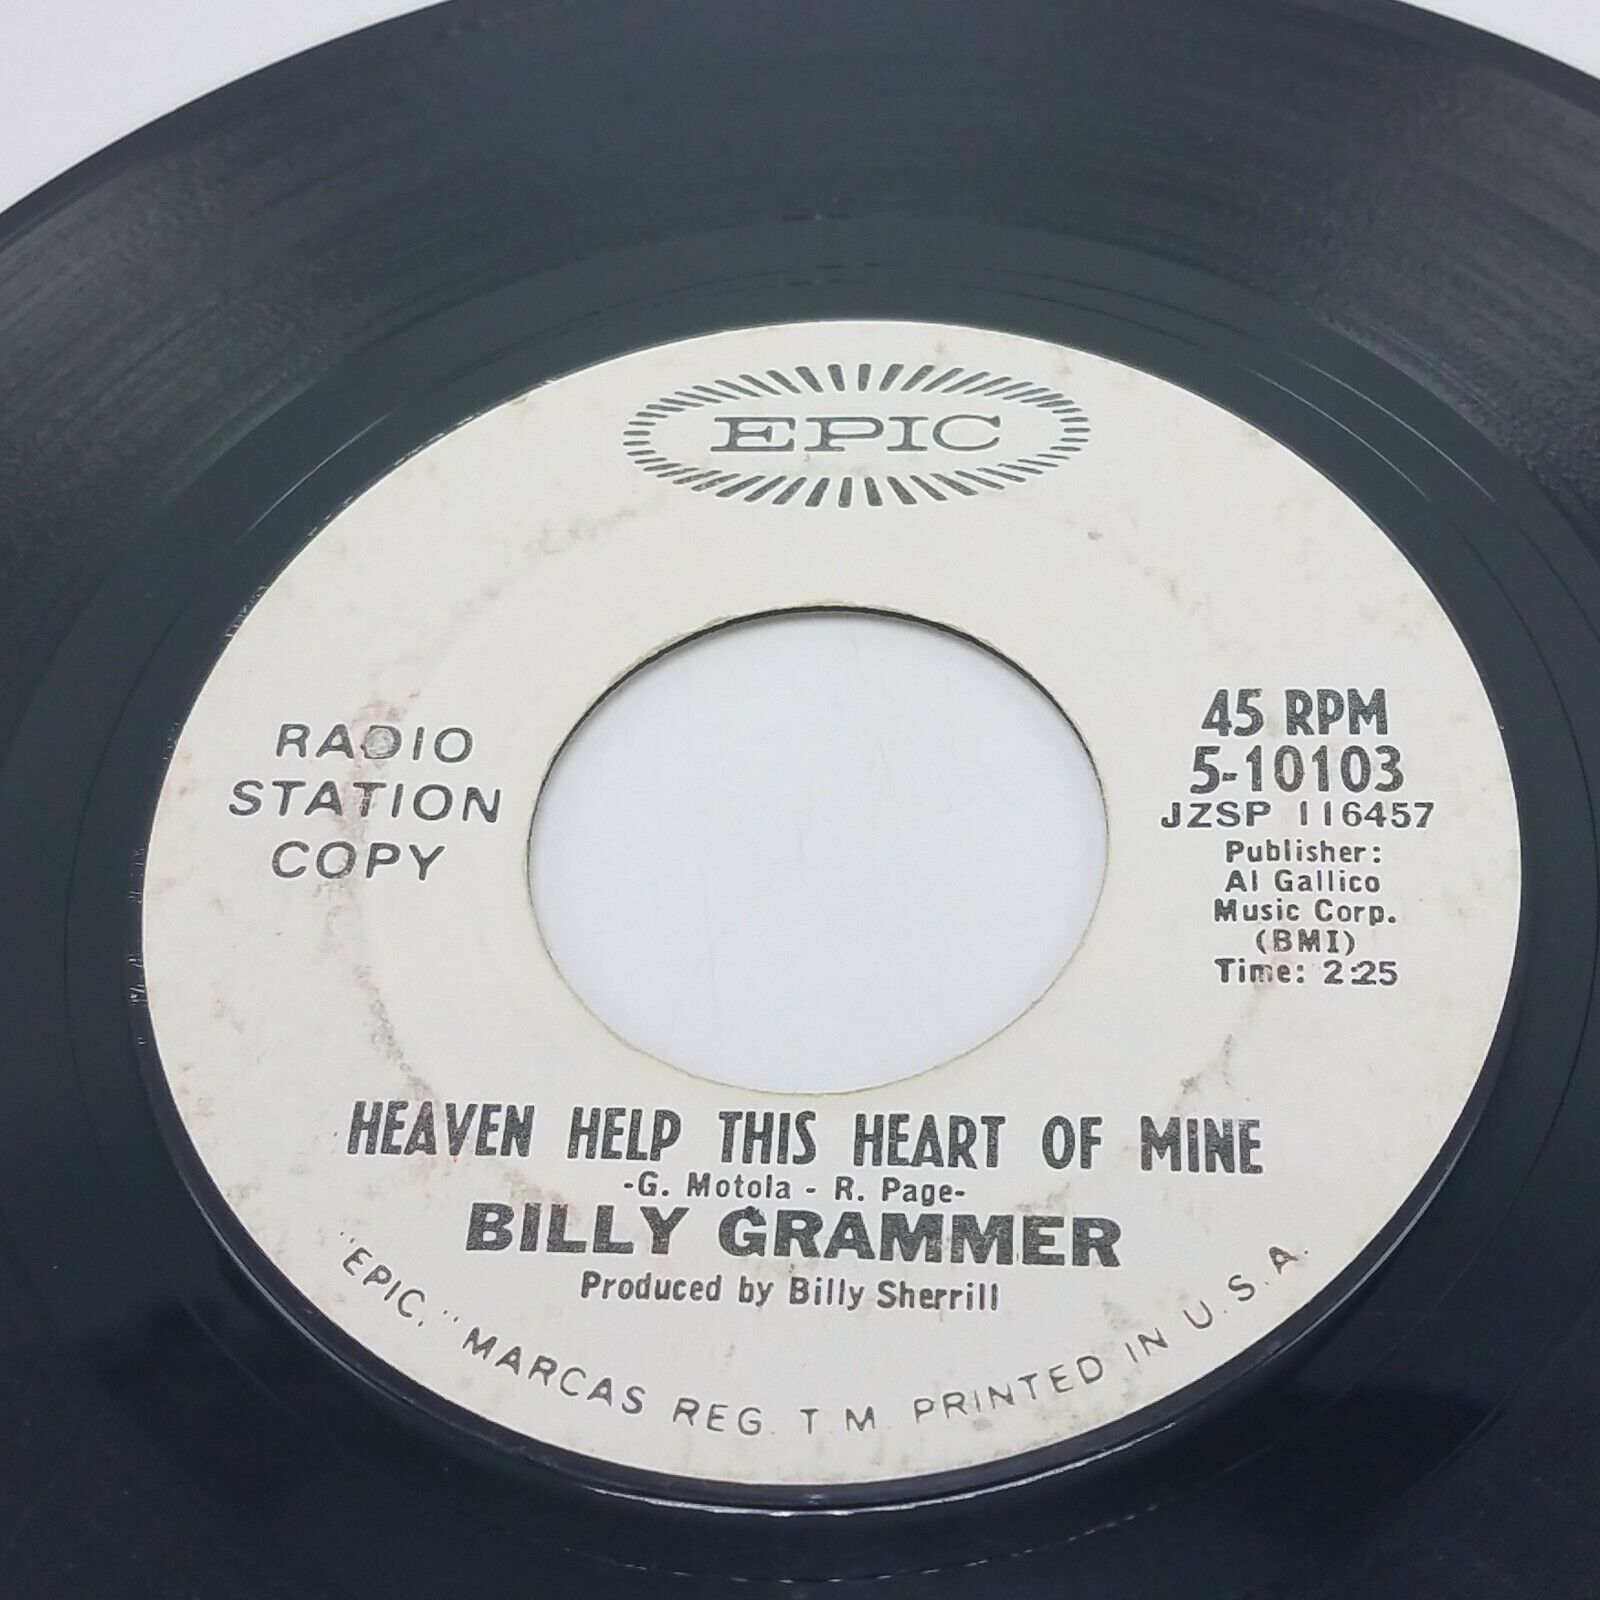  Billy Grammer Heaven Help This Heart Of Mine/The Real Thing PROMO 45 rpm 7" 